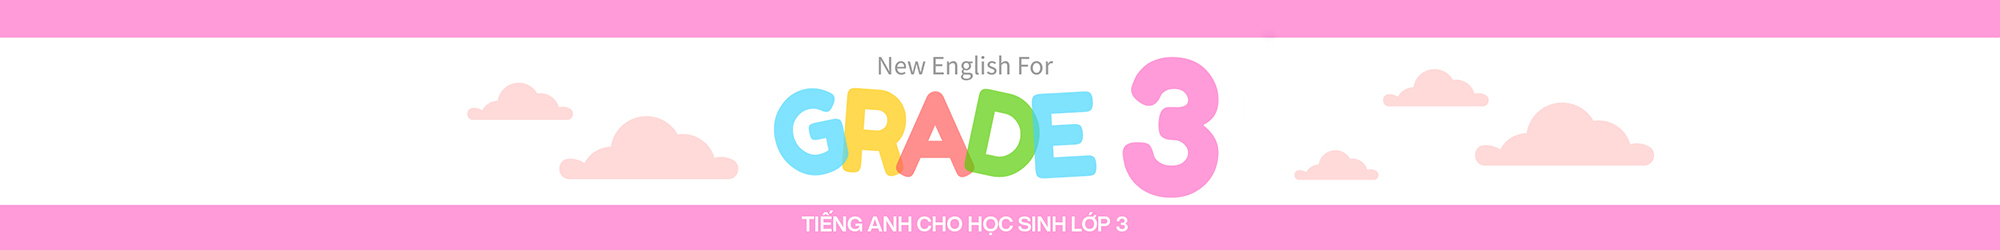 NEW ENGLISH FOR GRADE 3